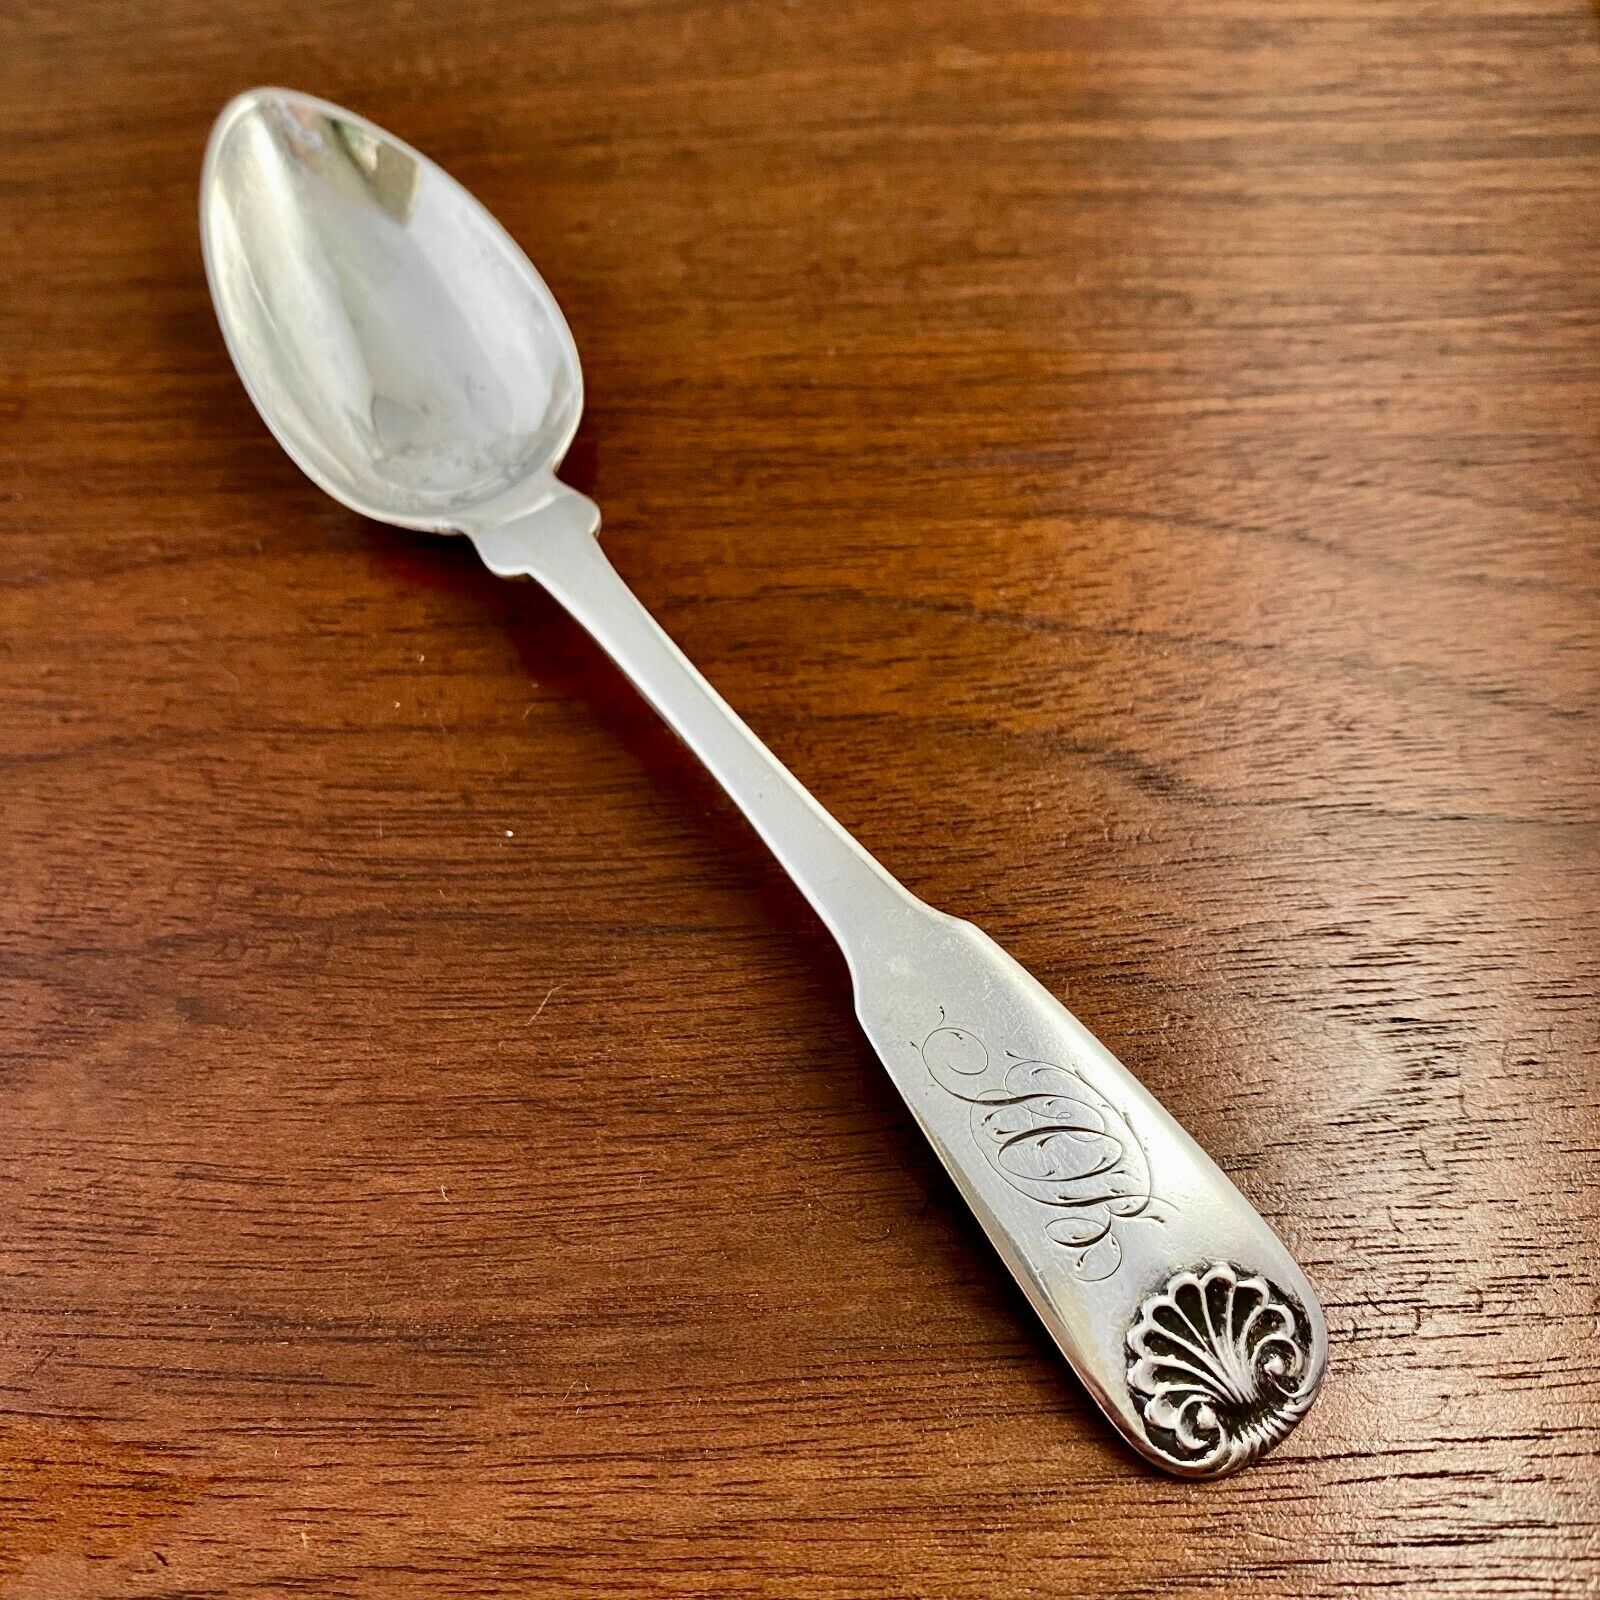 TAYLOR & HINSDALE COIN SILVER FIDDLE PATTERN SHELLBACK DESSERT SPOON c.1810 NYC